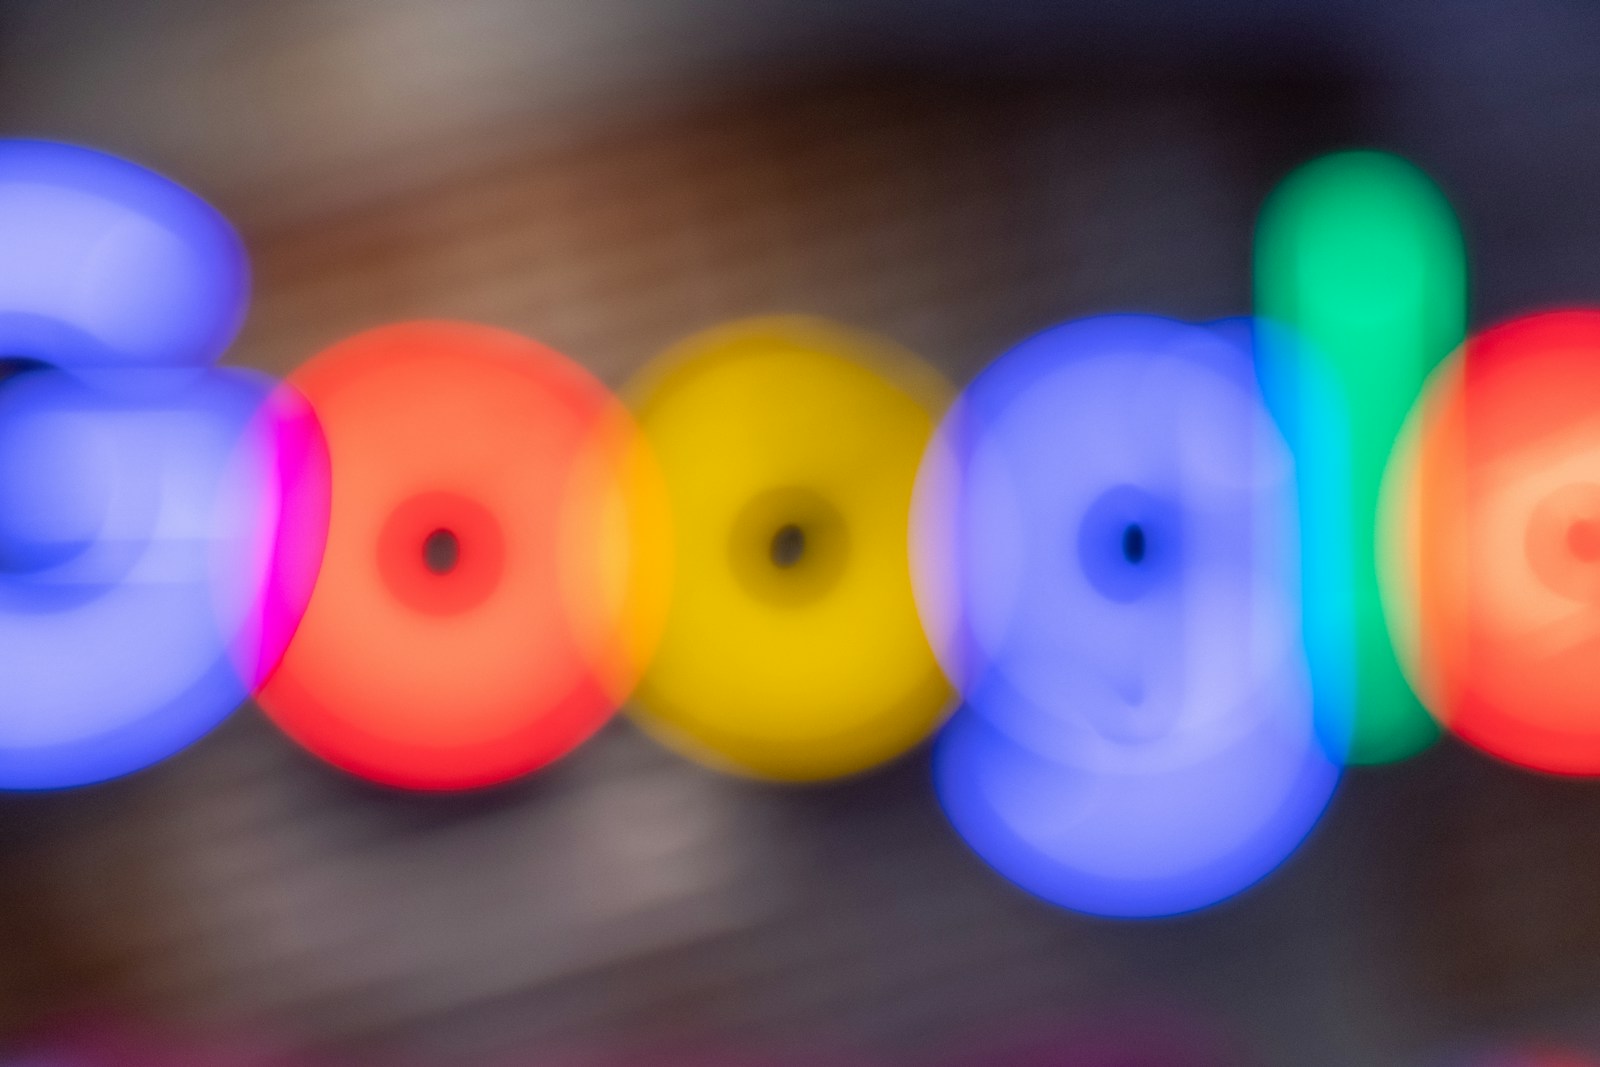 a google's blurry photo of a colorful object